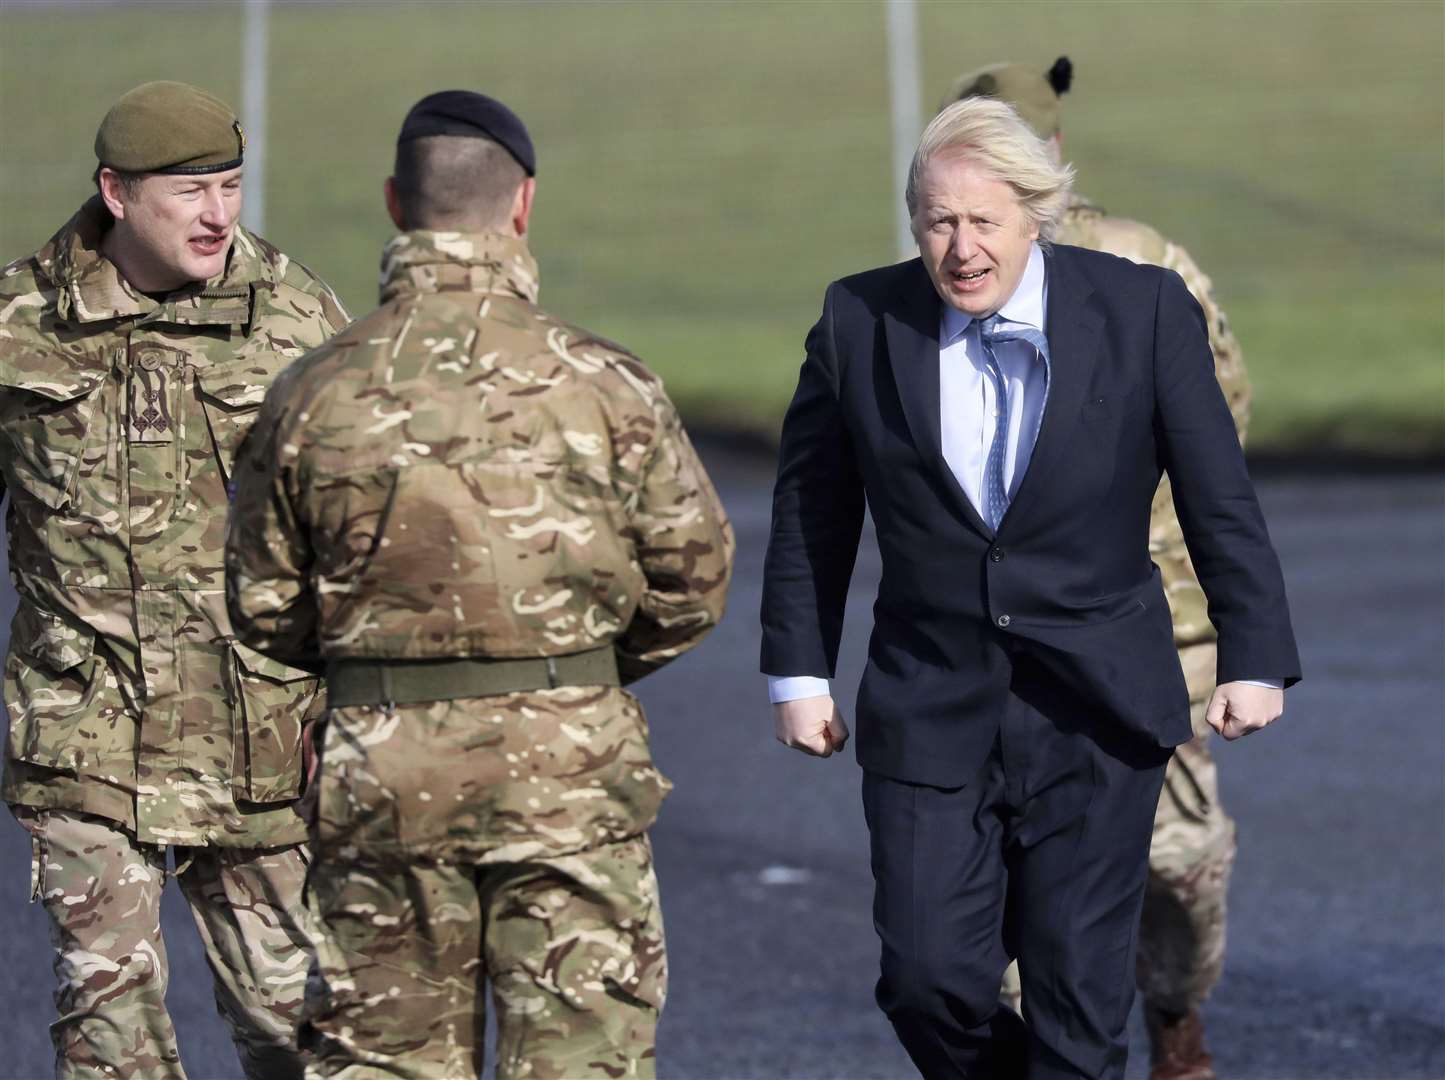 Boris Johnson has drawn back from activating plans to deploy troops (Peter Morrison/PA)